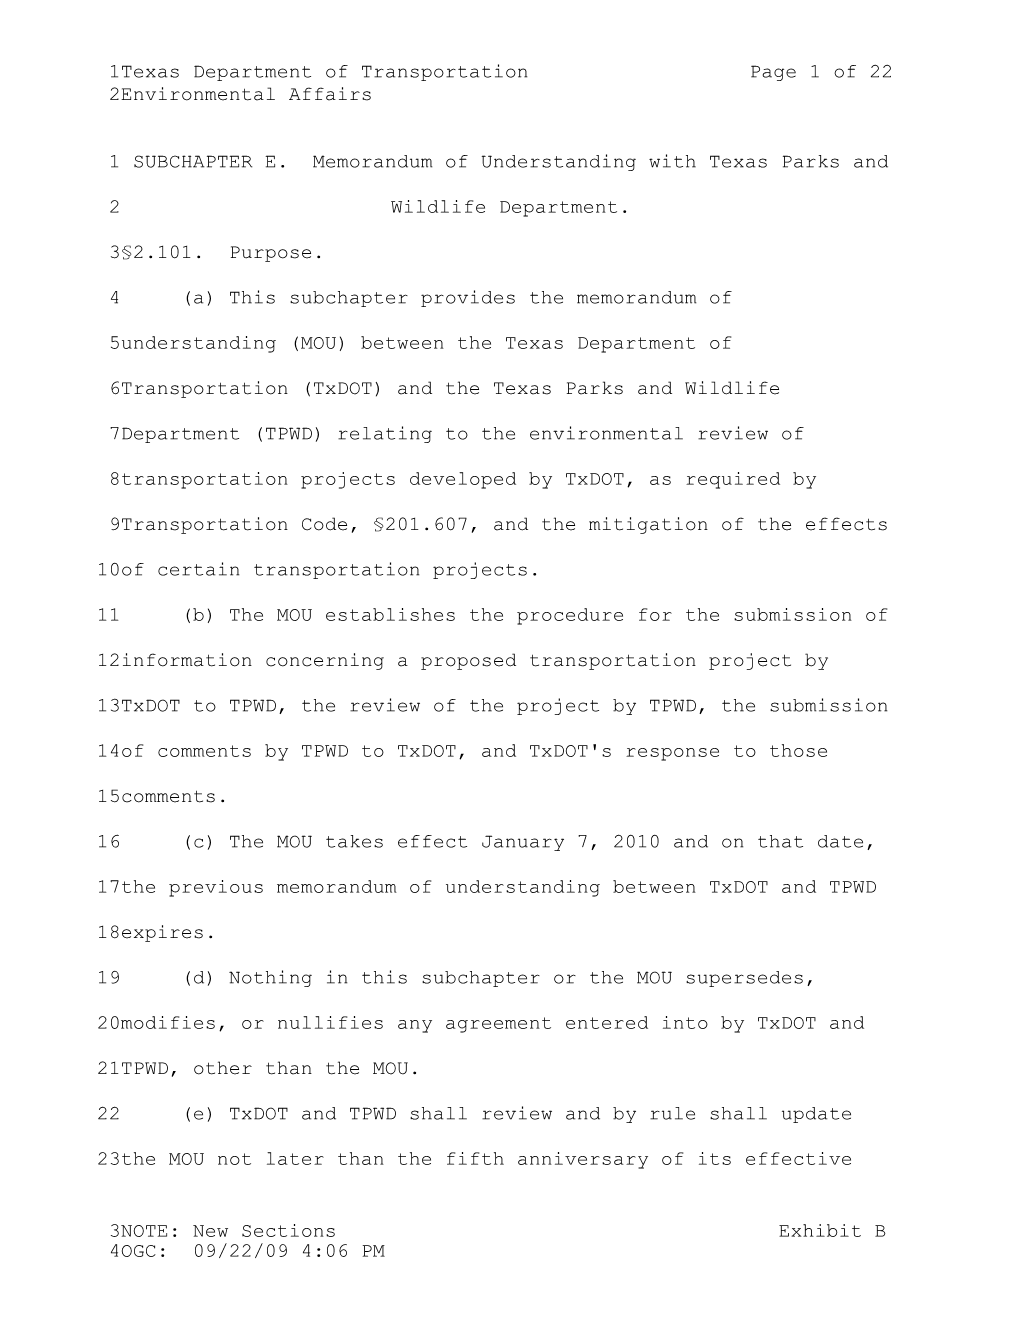 Texas Department of Transportation Page 17 of 22